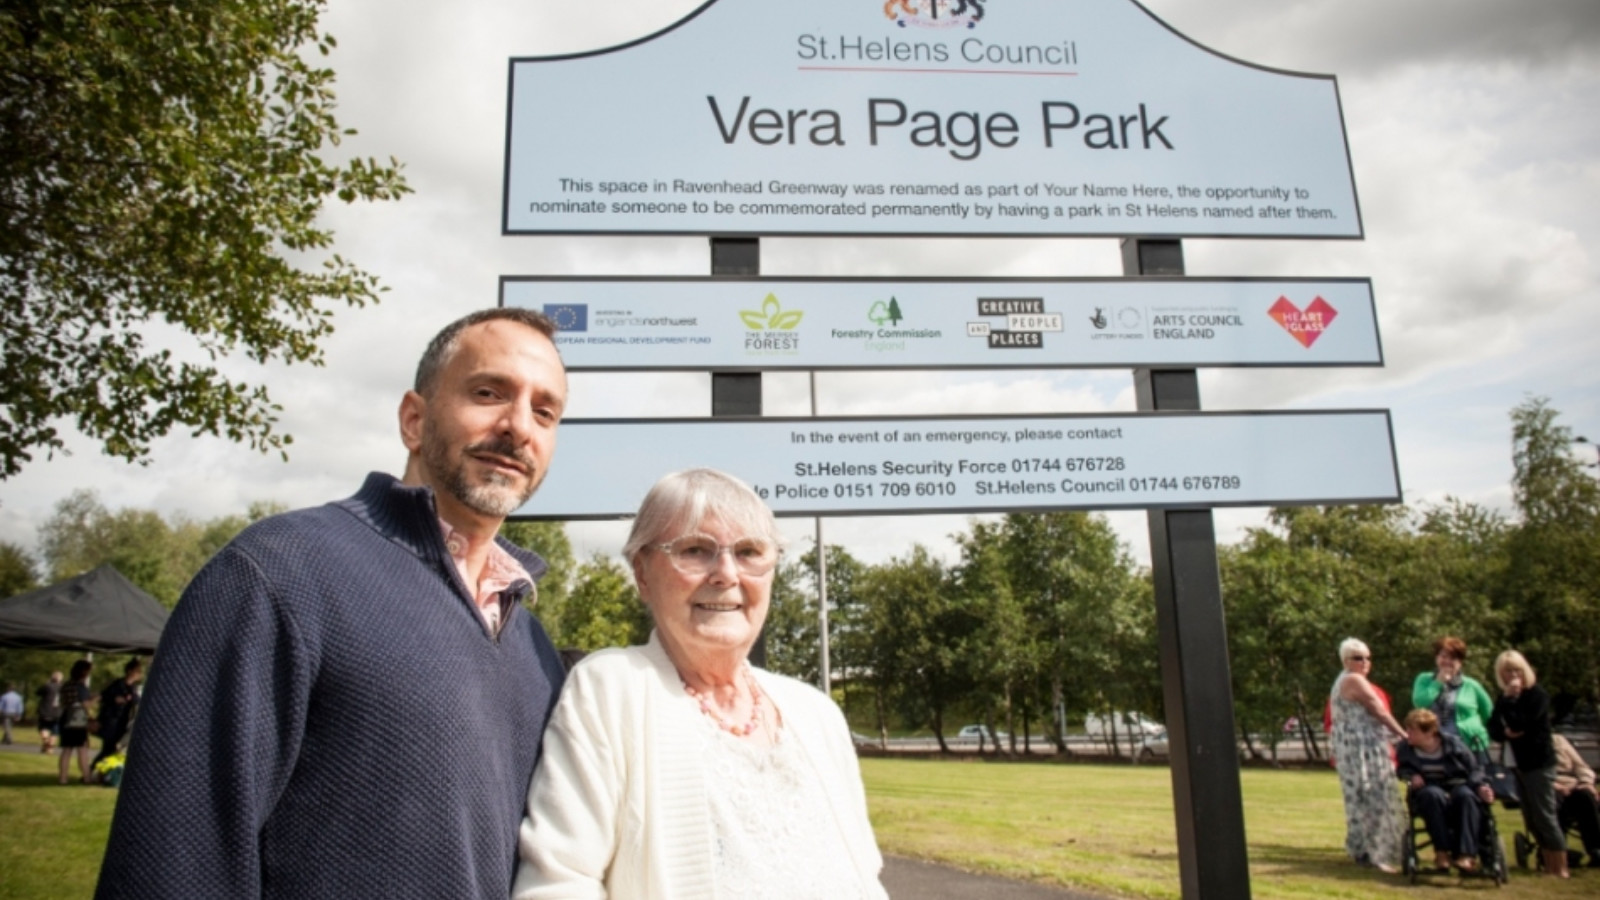 Two people, one older woman and one man, stand with their arms linked in front of a large sign. The sign has a crest at the top and reads 'St Helens Council. Vera Page Park' in large letters.